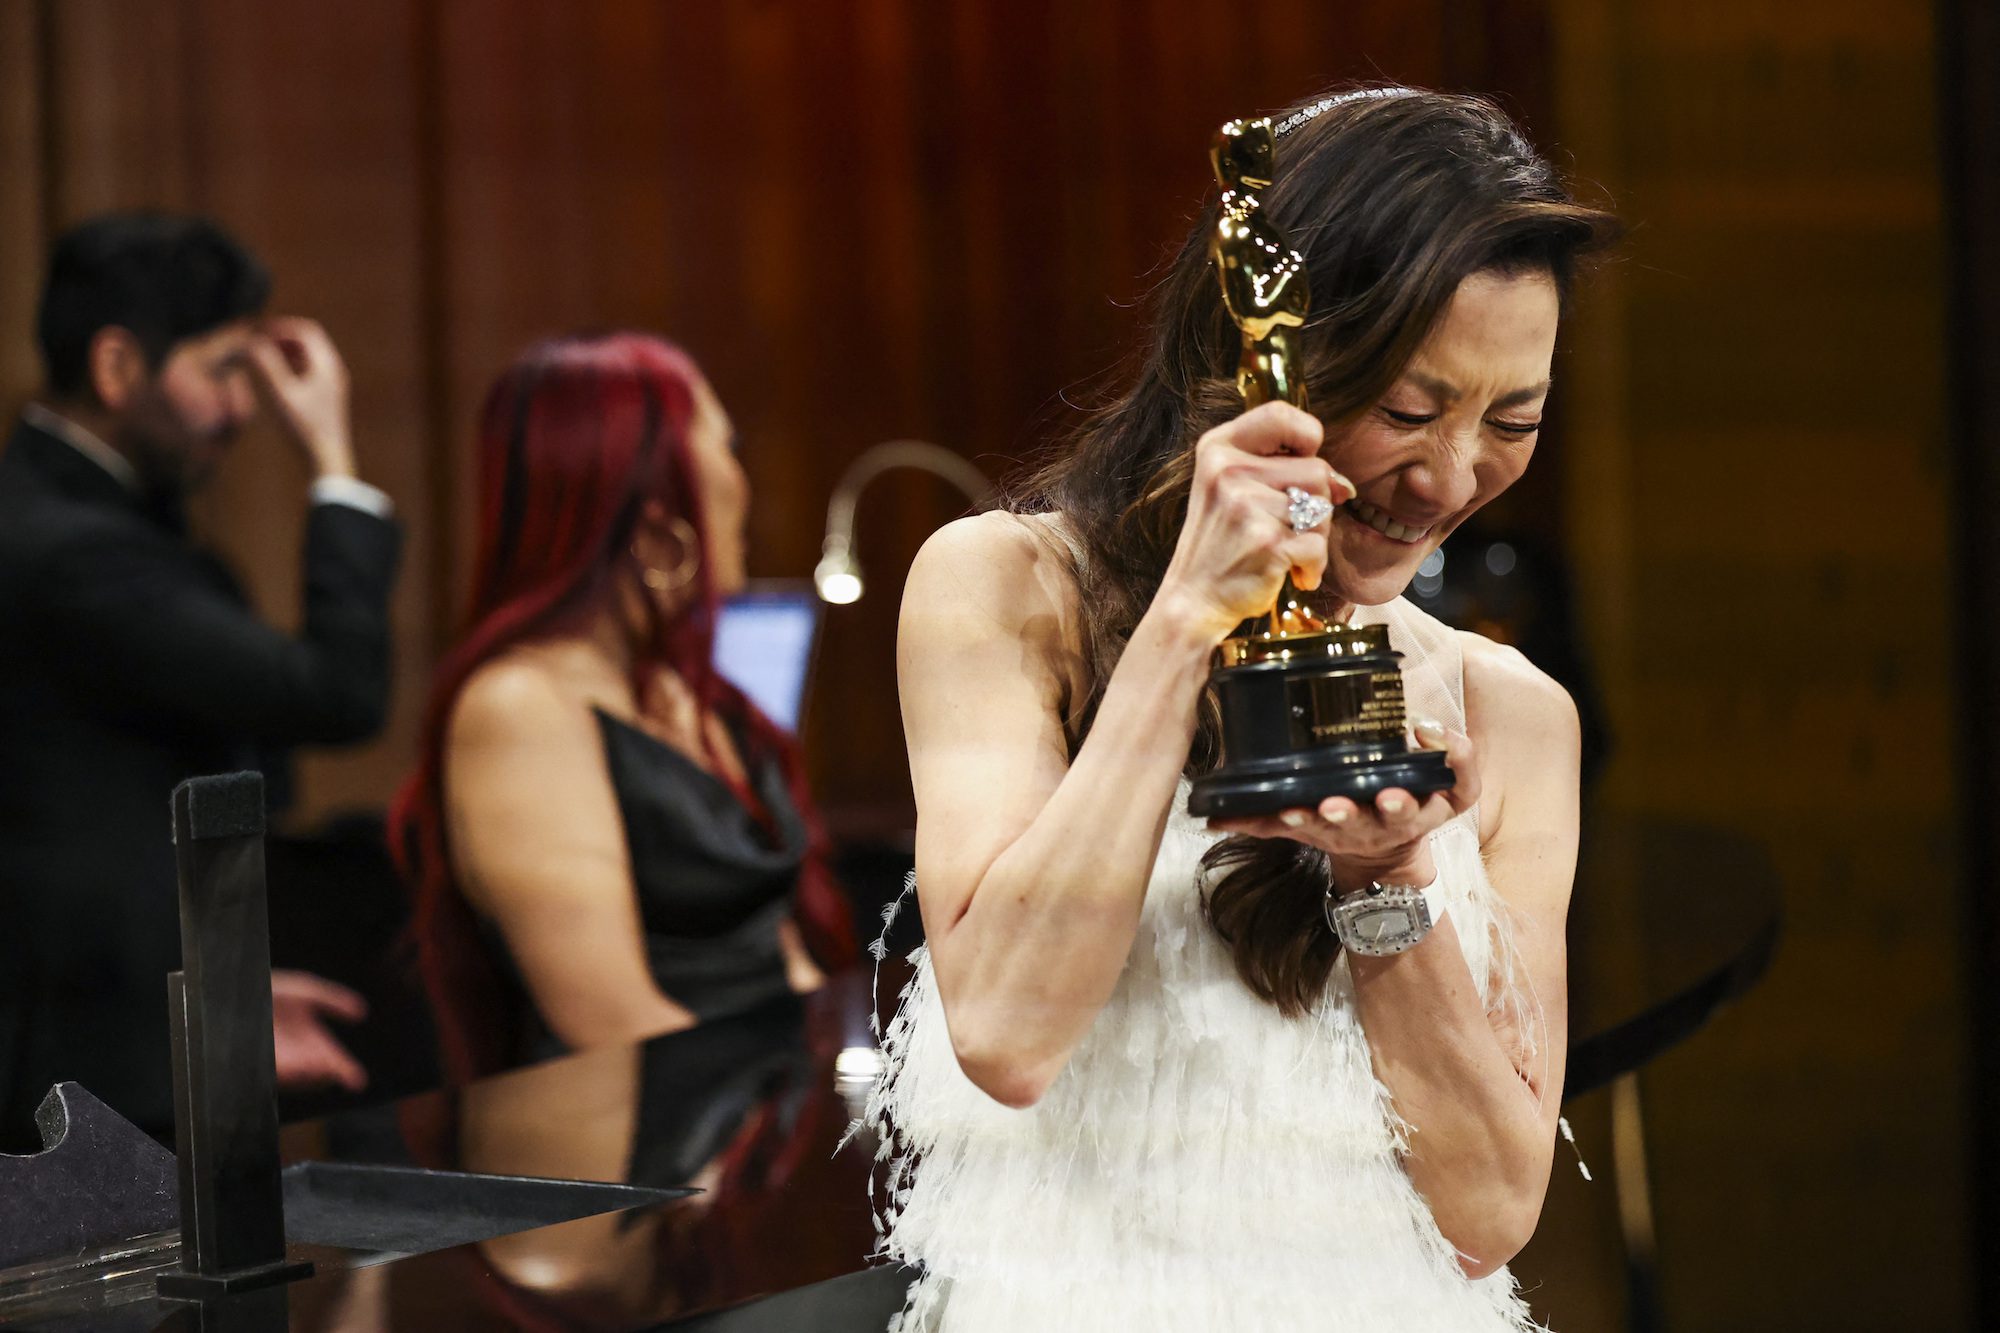 Best Actress Michelle Yeoh reacts after having her Oscar engraved at the Governors Ball following the Oscars show at the 95th Academy Awards in Hollywood, Los Angeles, California, U.S., March 12, 2023. REUTERS/Mario Anzuoni